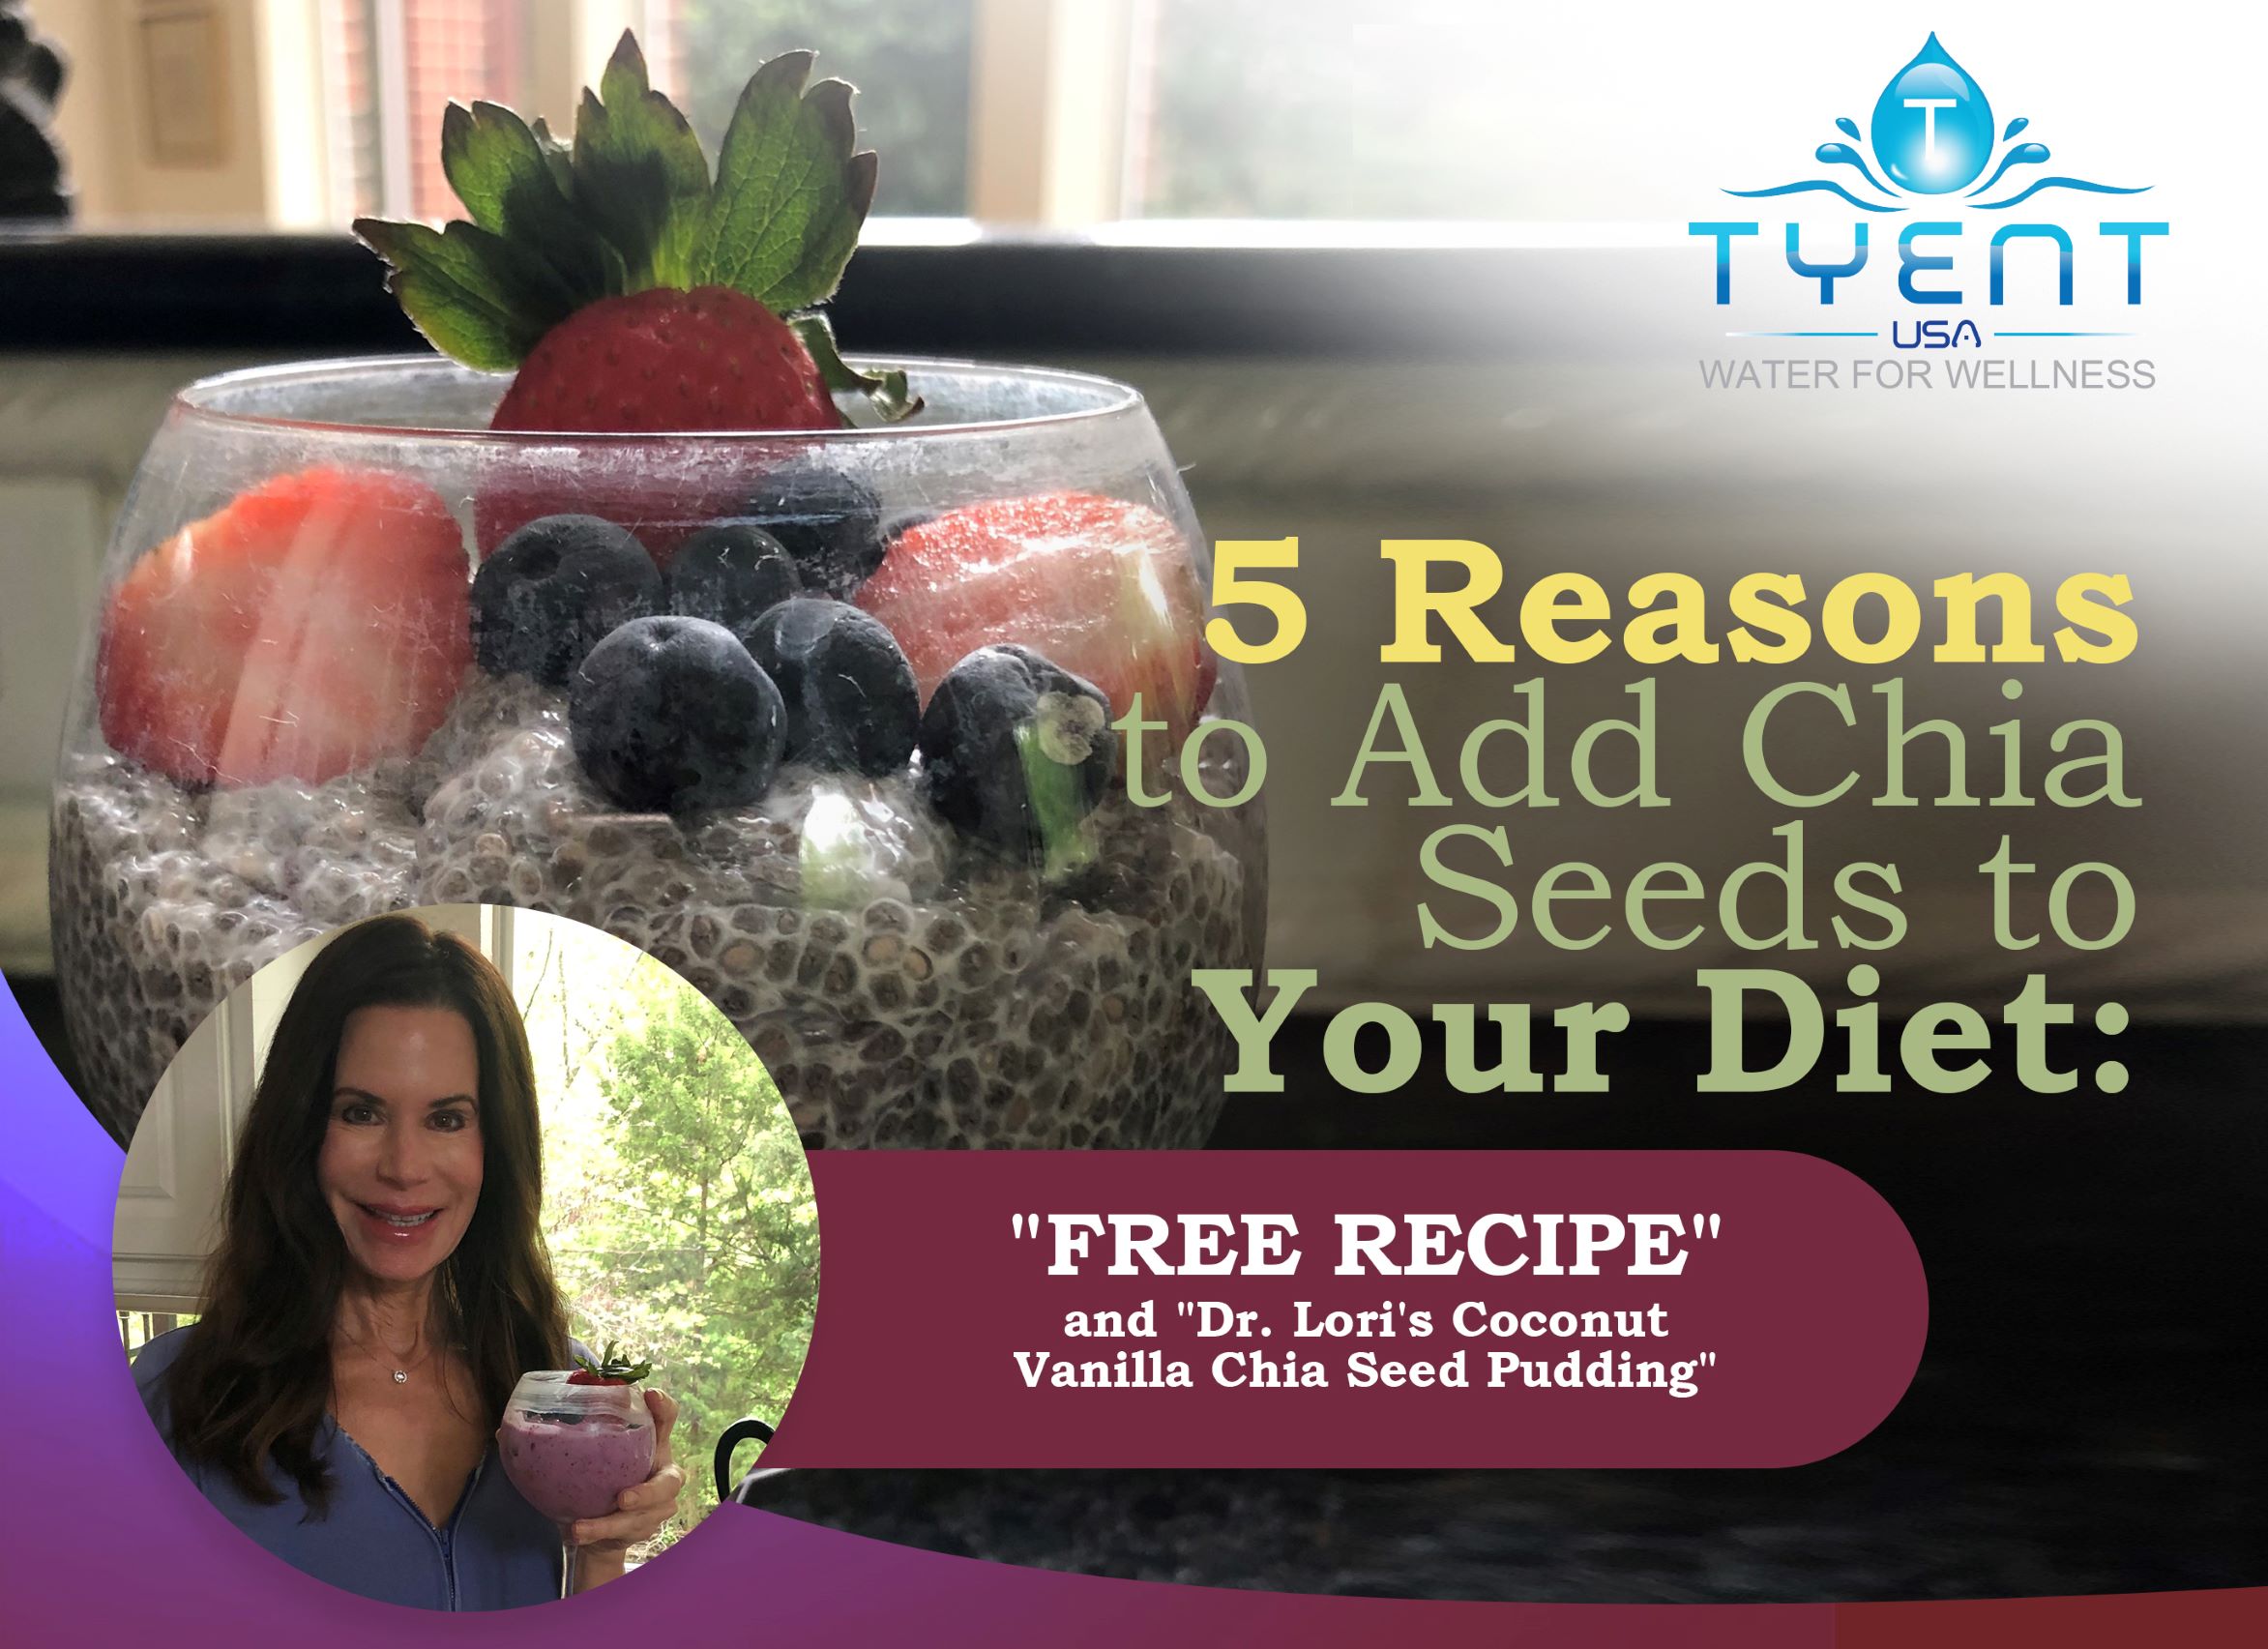 5 Reasons to Add Chia Seeds to Your Diet